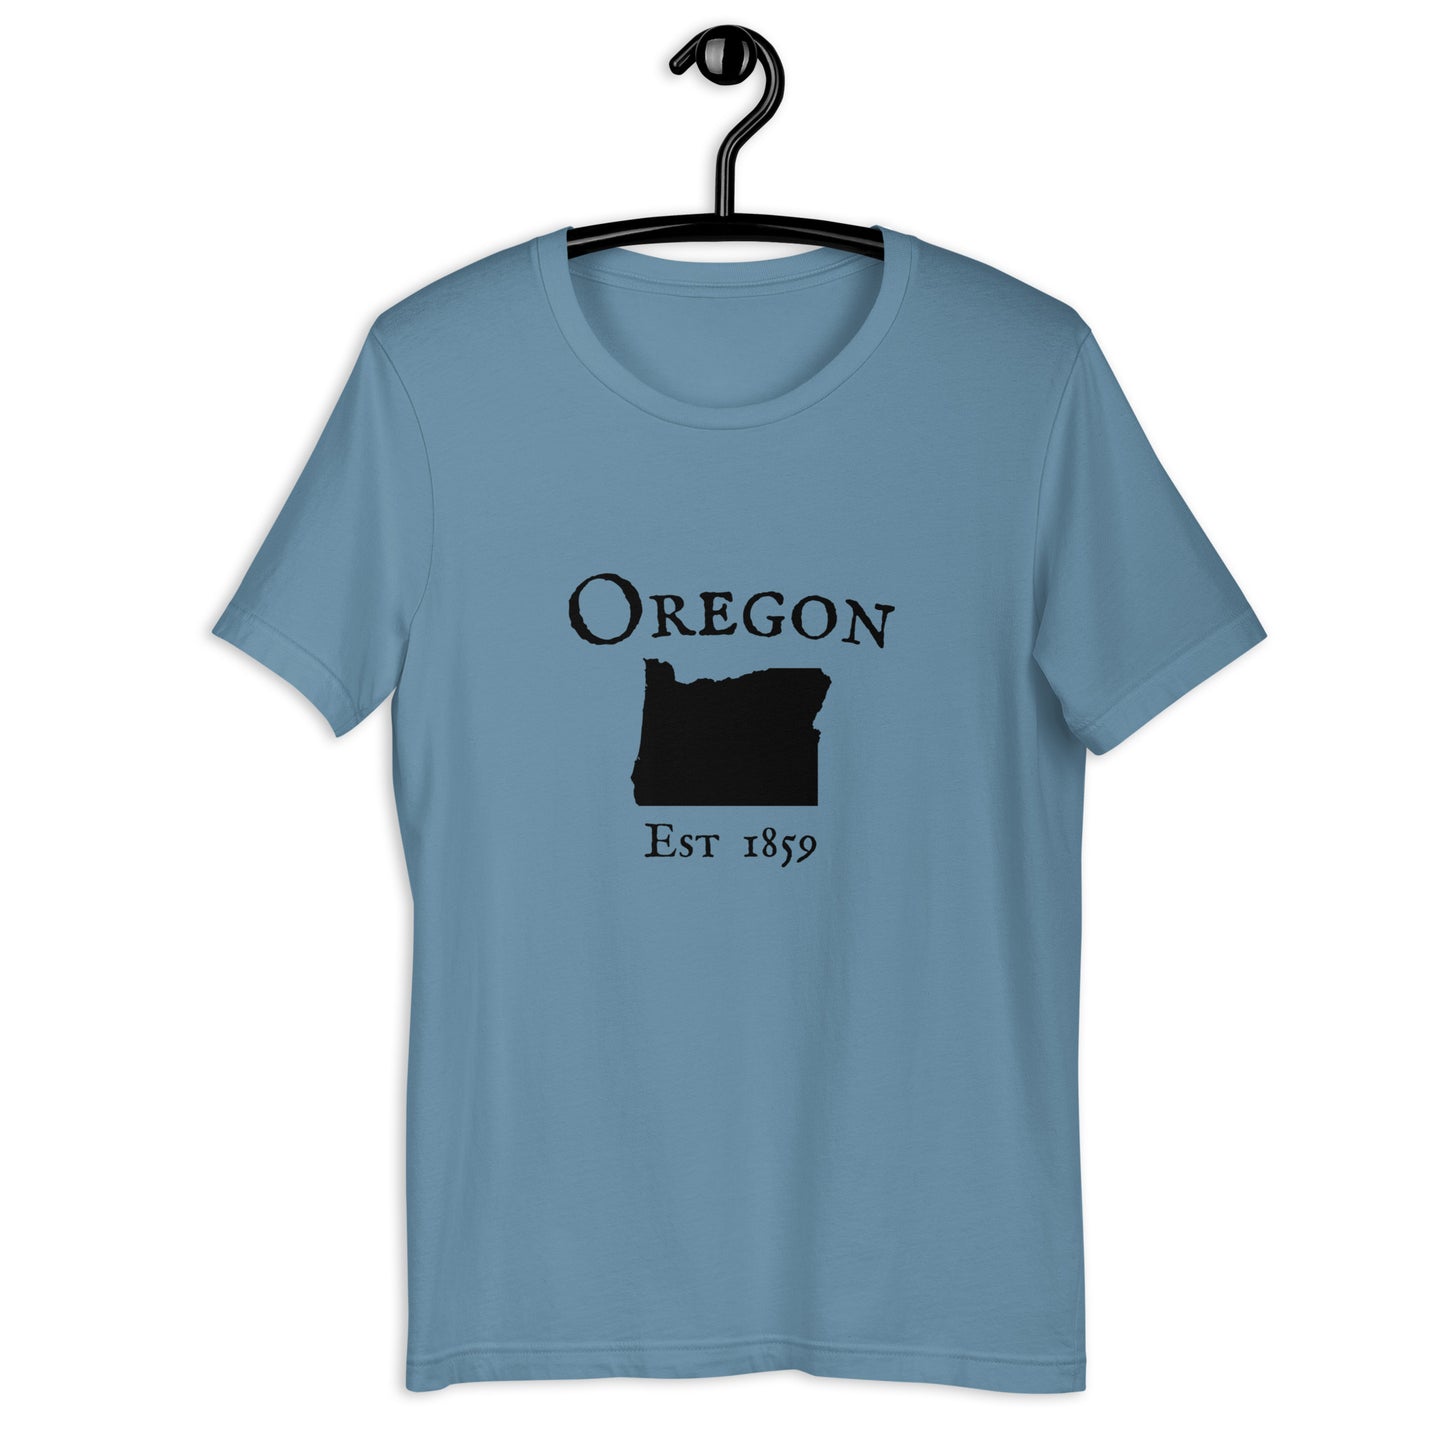 "Oregon Established In 1859" T-Shirt - Weave Got Gifts - Unique Gifts You Won’t Find Anywhere Else!